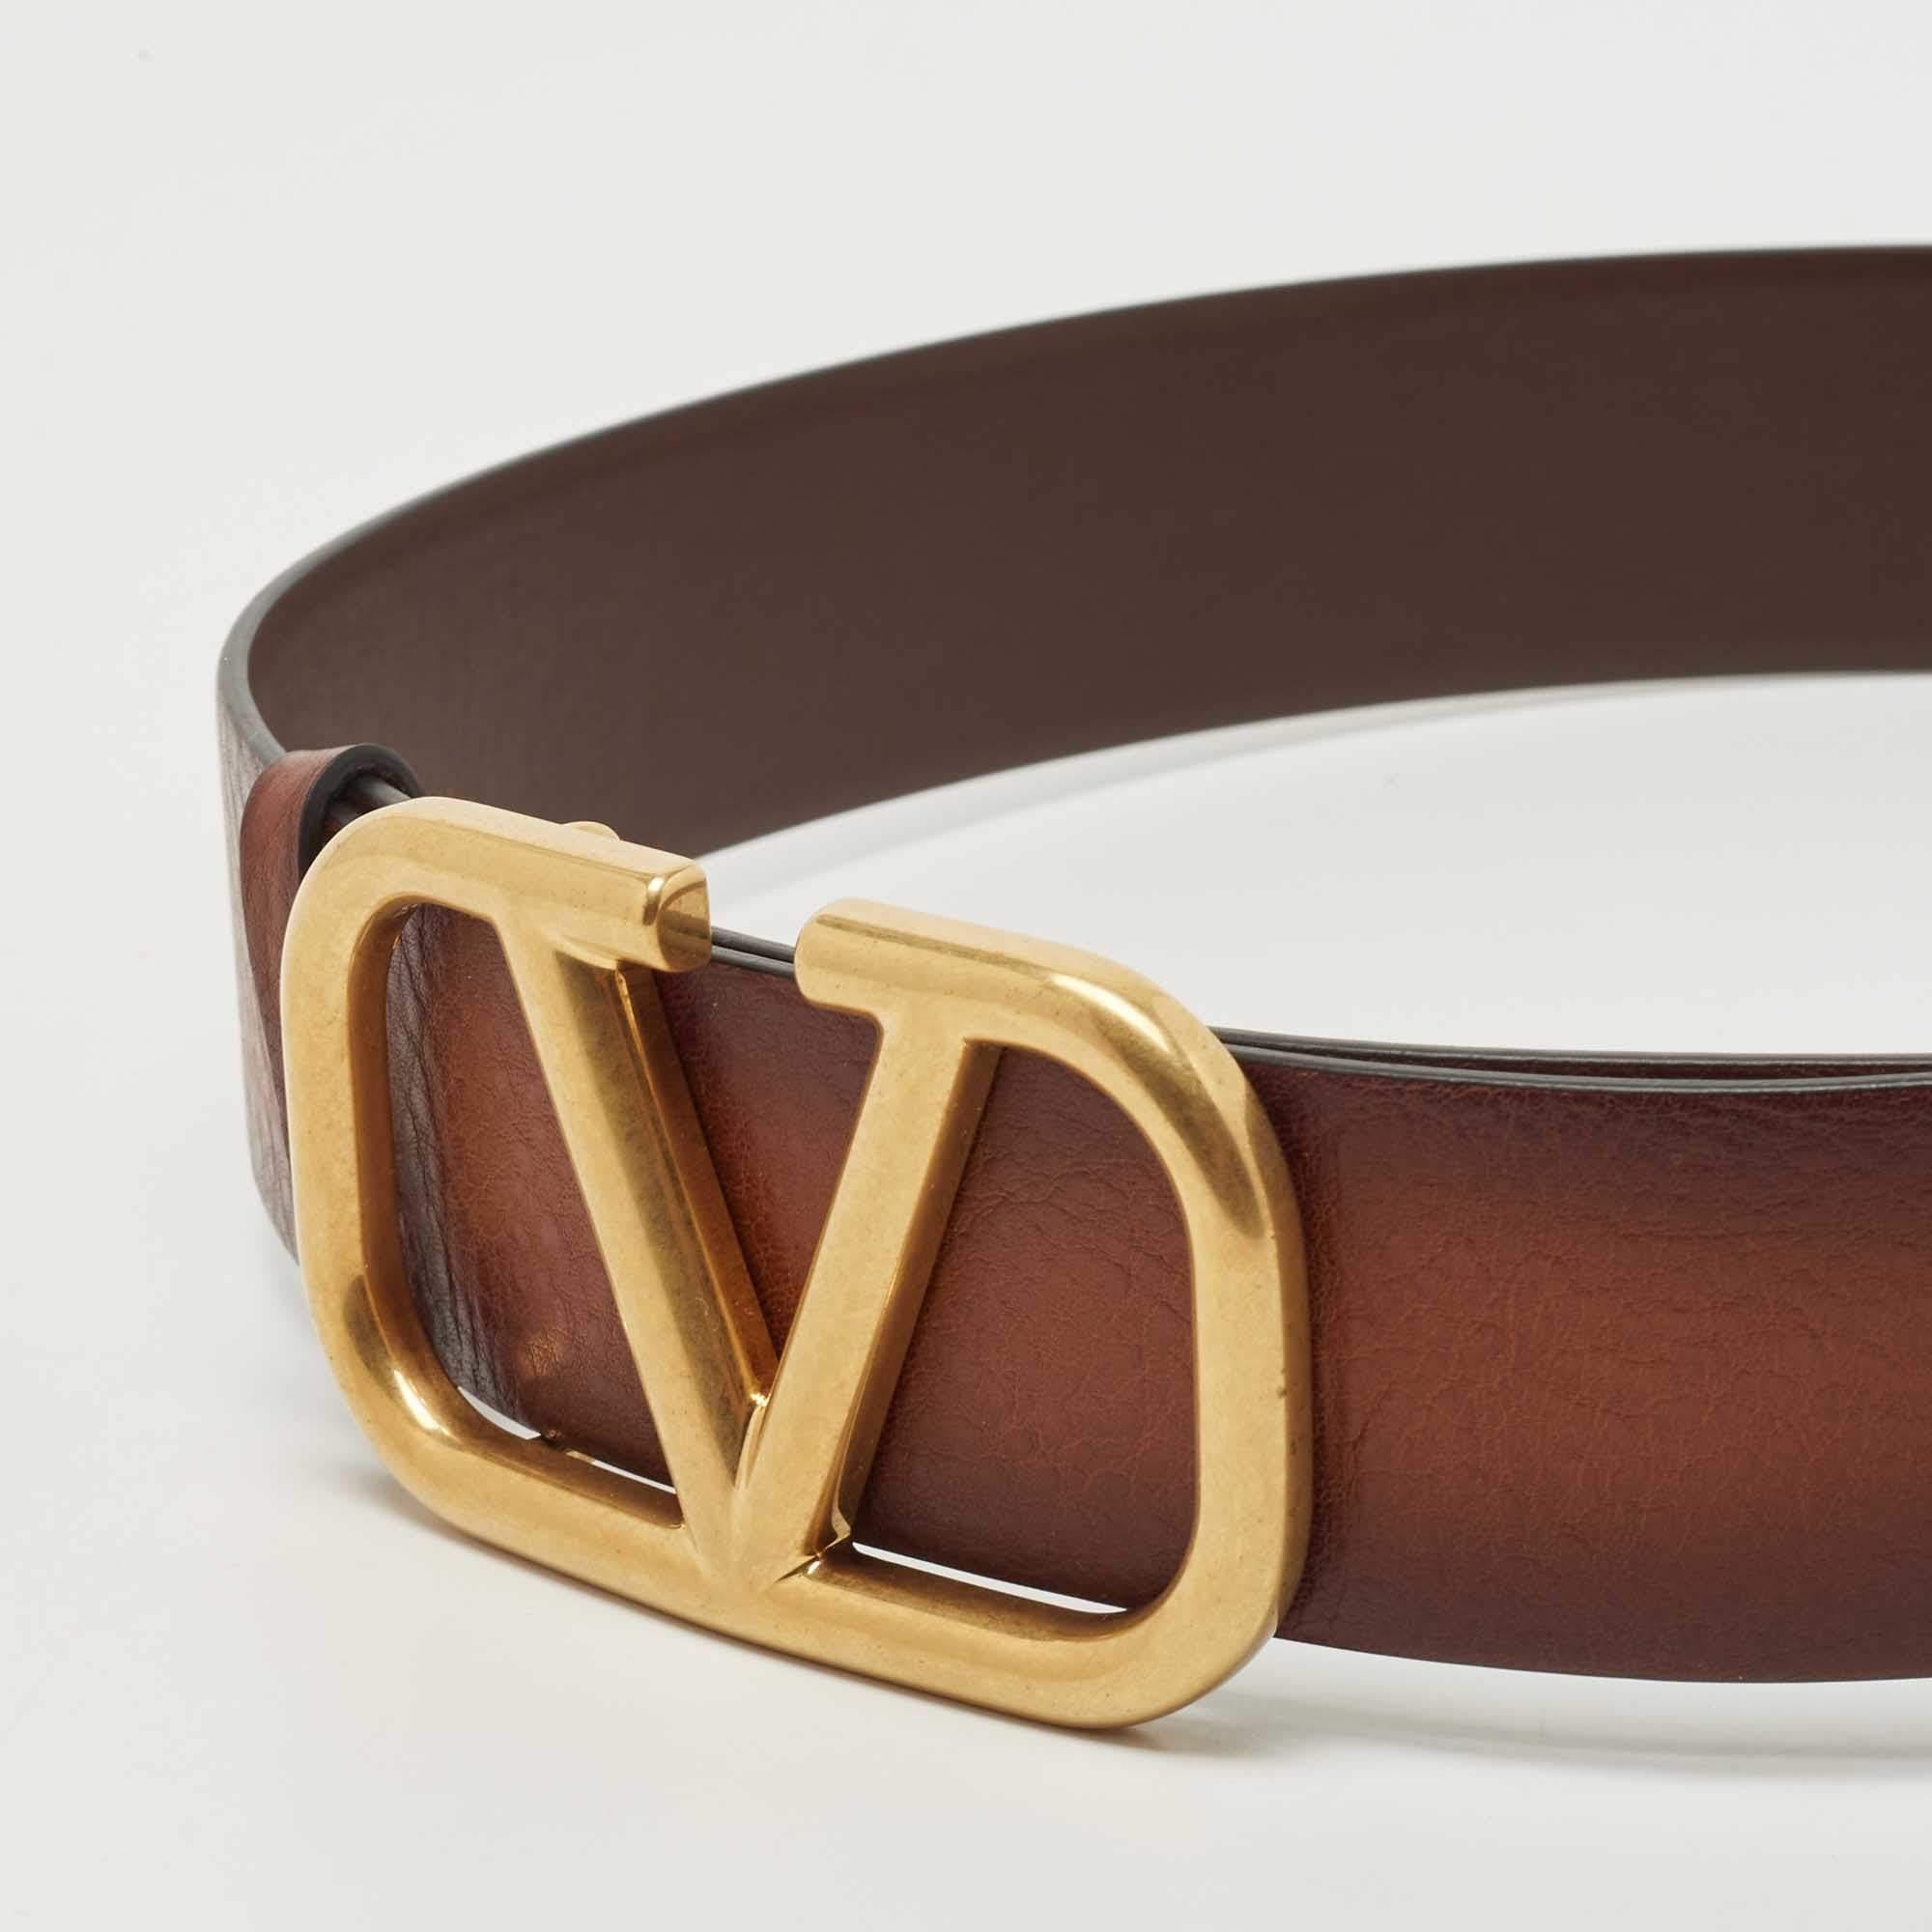 Belts are fine accessories to upgrade any basic look to a statement-making one. We particularly love this offering by Valentino. Formed using leather, the brown belt has a VLogo buckle for an impeccable finish.

Includes: Original Dustbag, Original